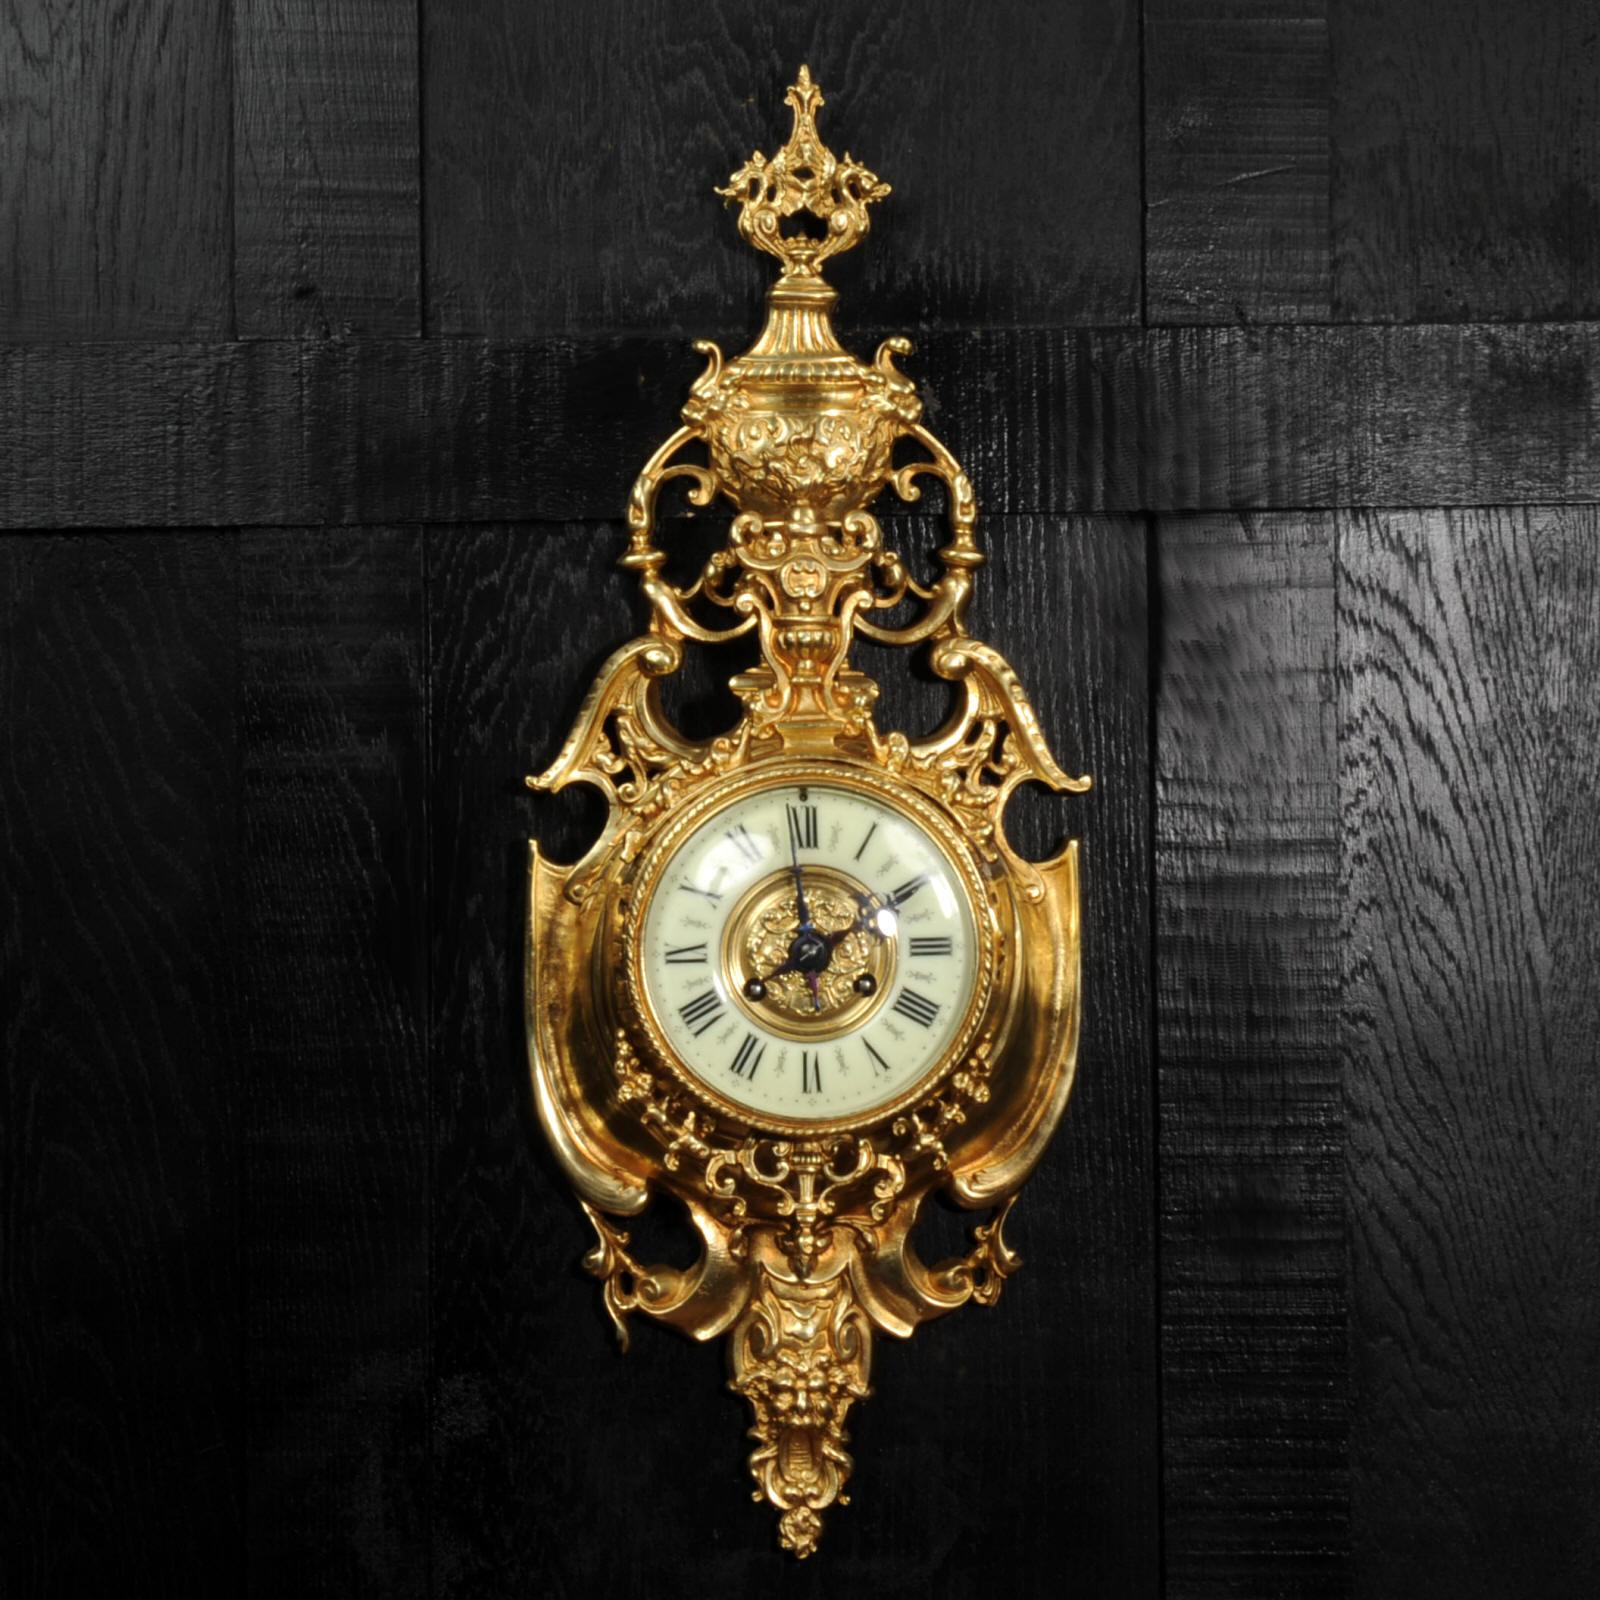 A stunning original antique French cartel wall clock by Vincenti et Cie. It is beautifully modelled in gilt bronze in the Baroque style, Shield shaped with swan neck pediment, a grotesque mask below the dial. Above the dial a fountain with lions